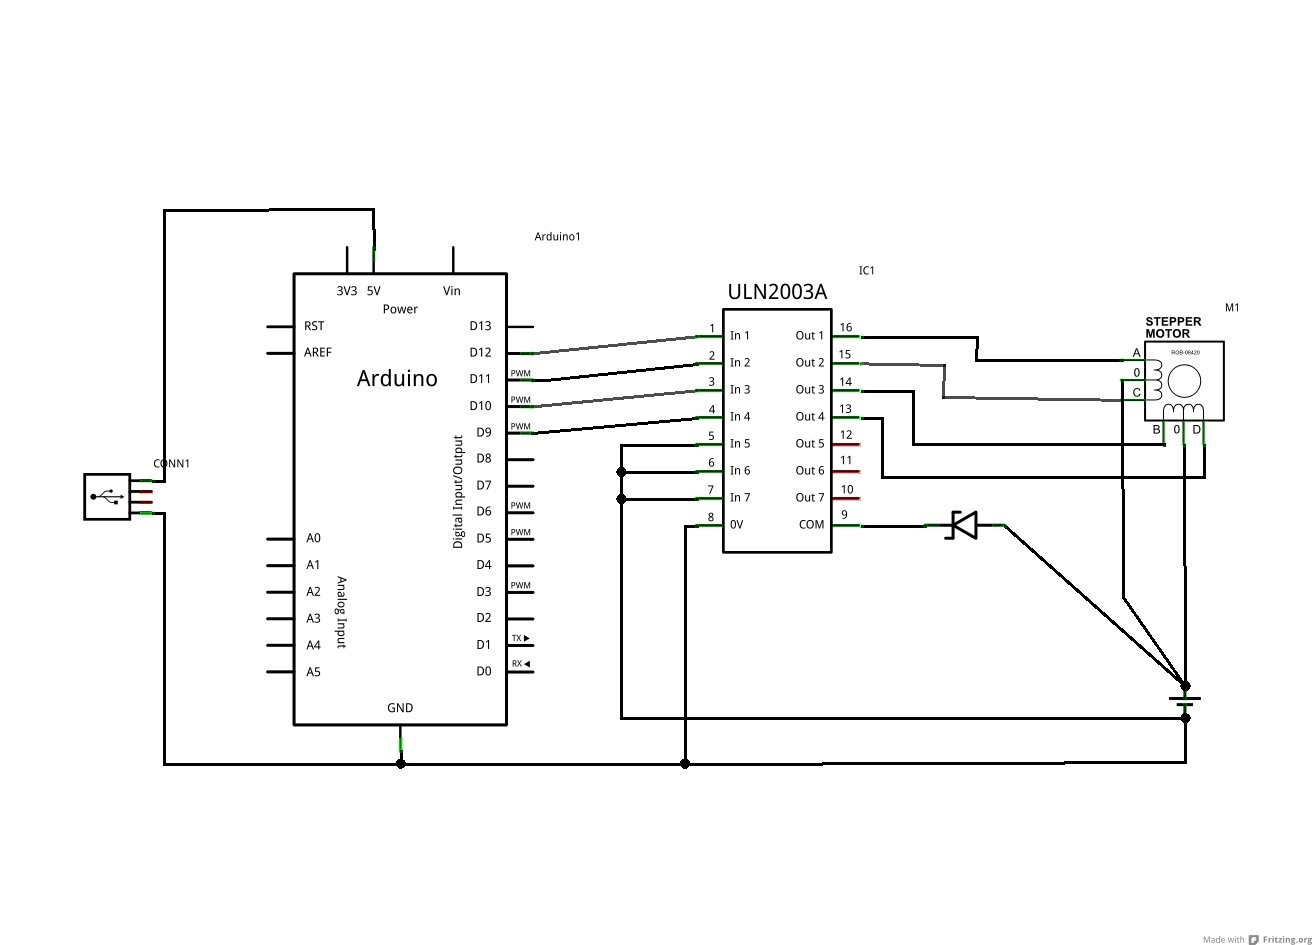 Exclusive 5 Wire Motor Wiring Diagram | Circuitwiringdiagram - 5 Wire Motor Wiring Diagram